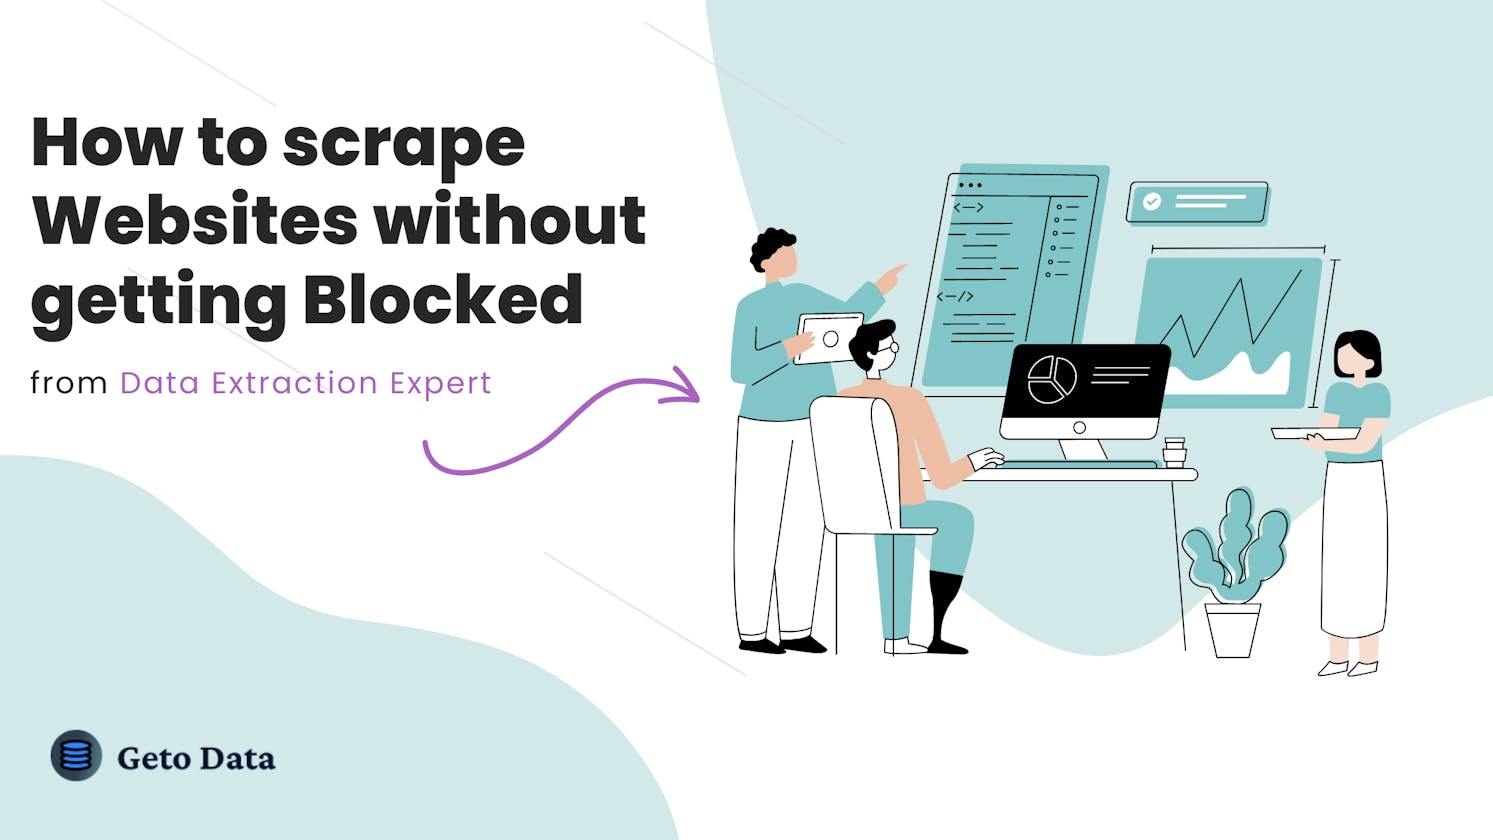 How to scrape Websites without getting Blocked